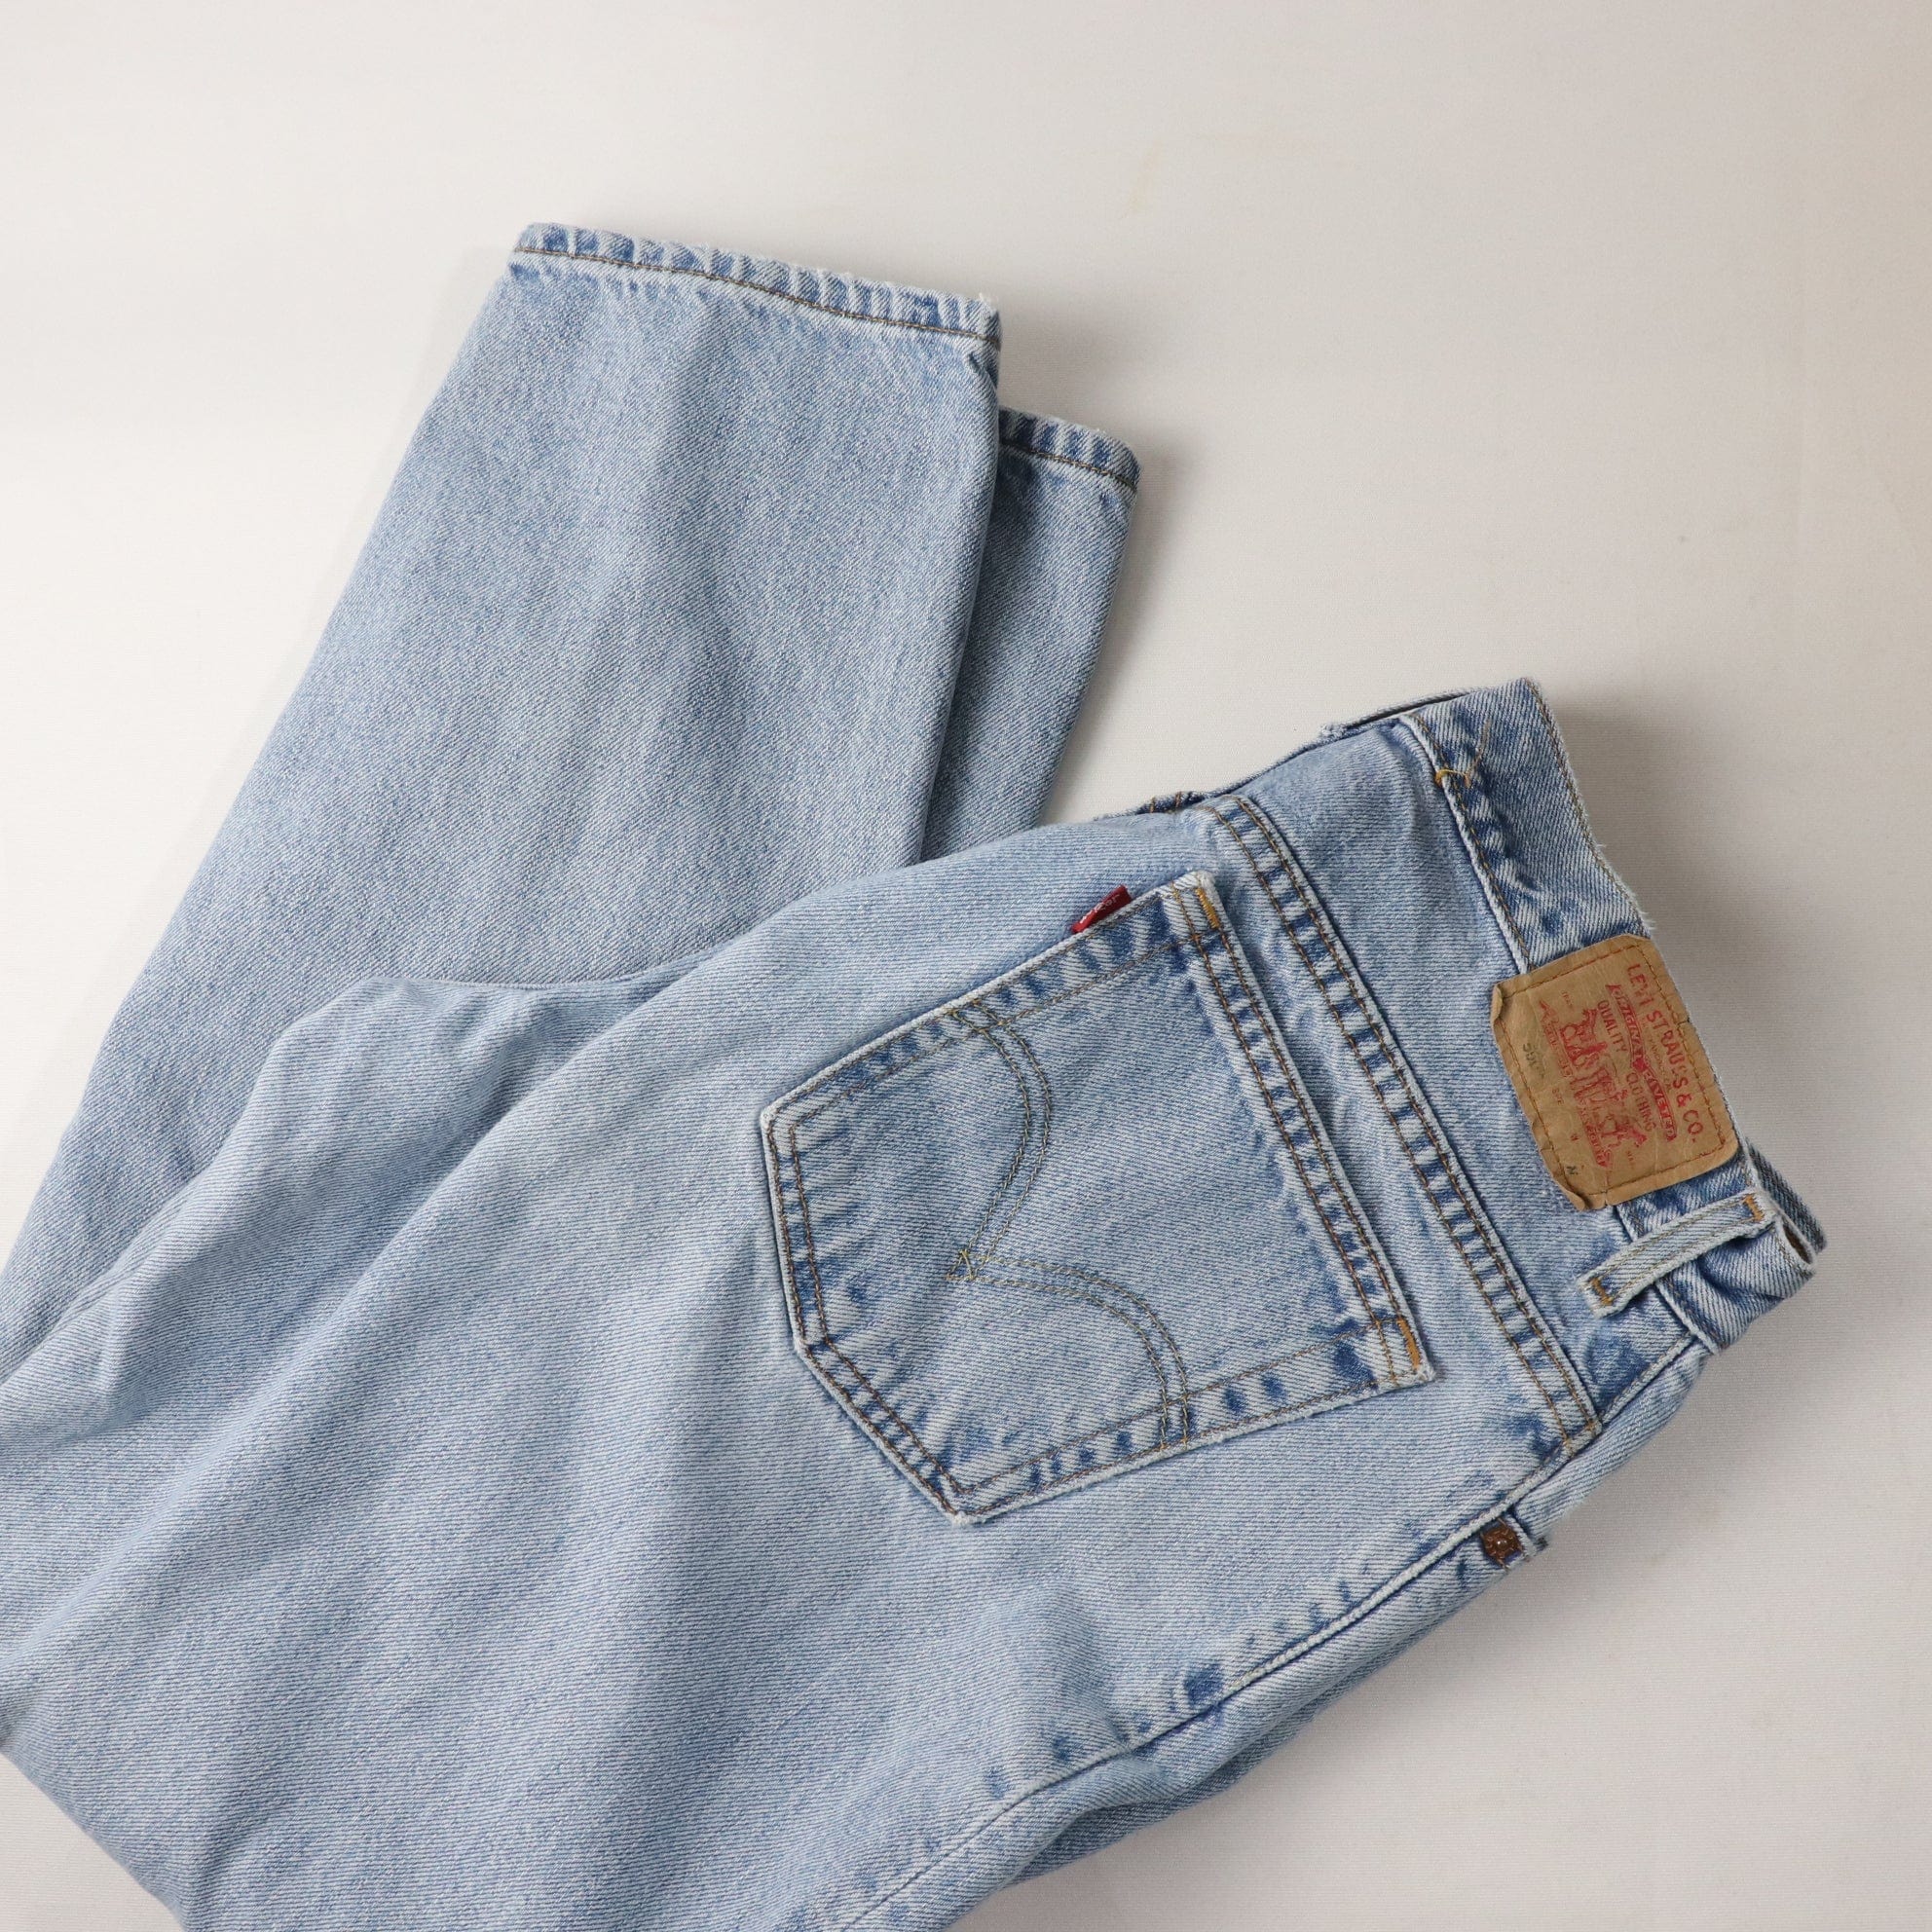 Levi's 550 Relaxed Tapered Leg Denim Jeans Women's Size 16